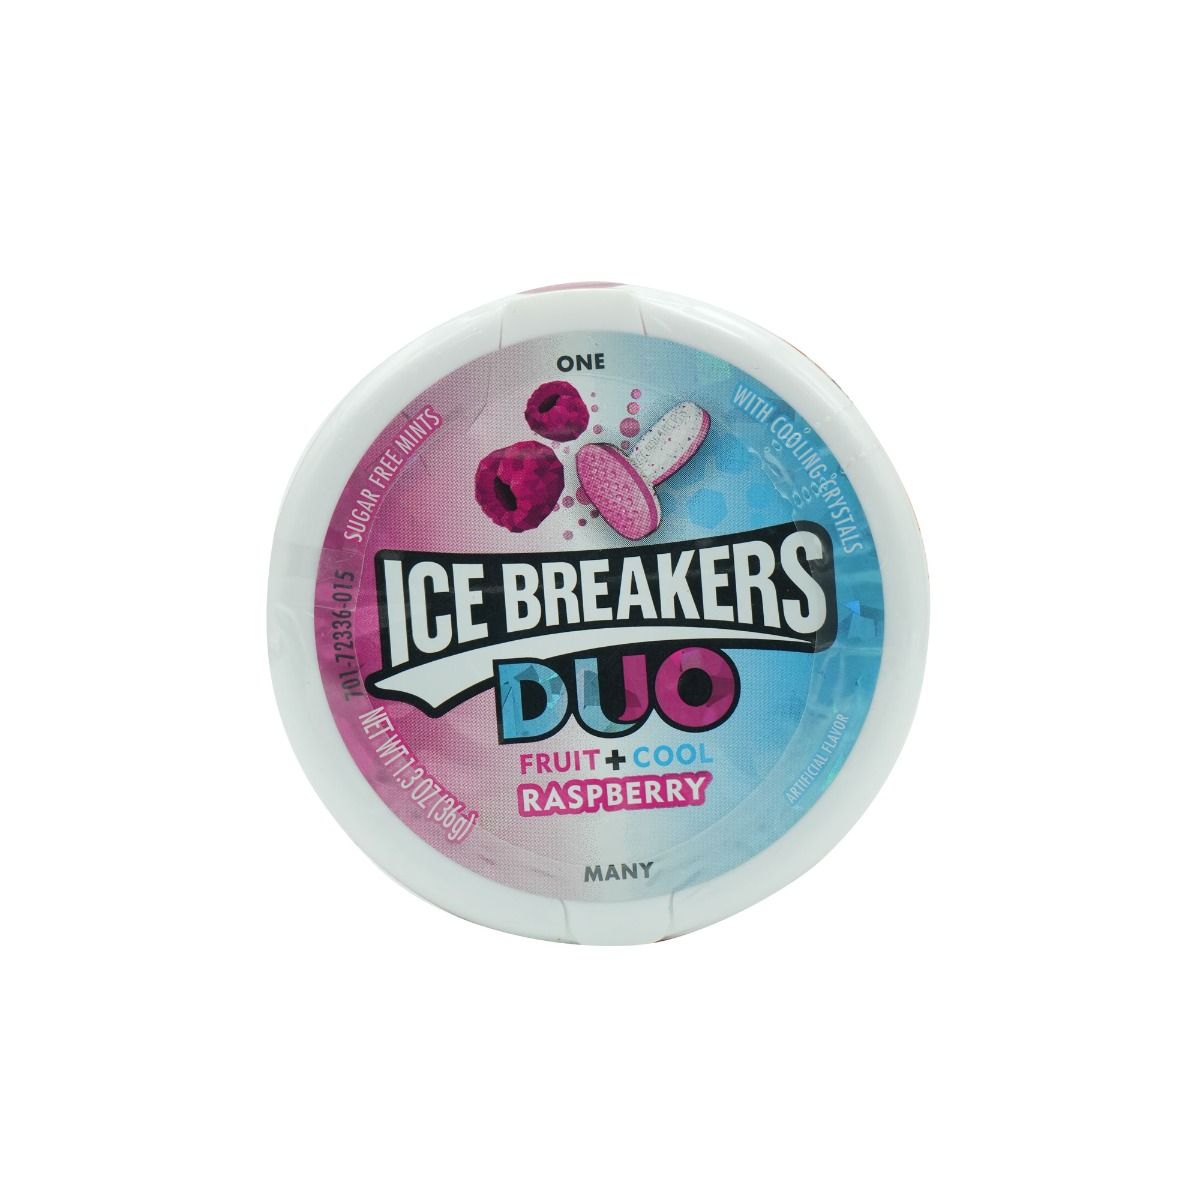 Ice Breakers Duo Fruit + Cool Sugar FreeRaspberry Sugar Free Mouth Freshner Mints, 36 gm, Pack of 1 